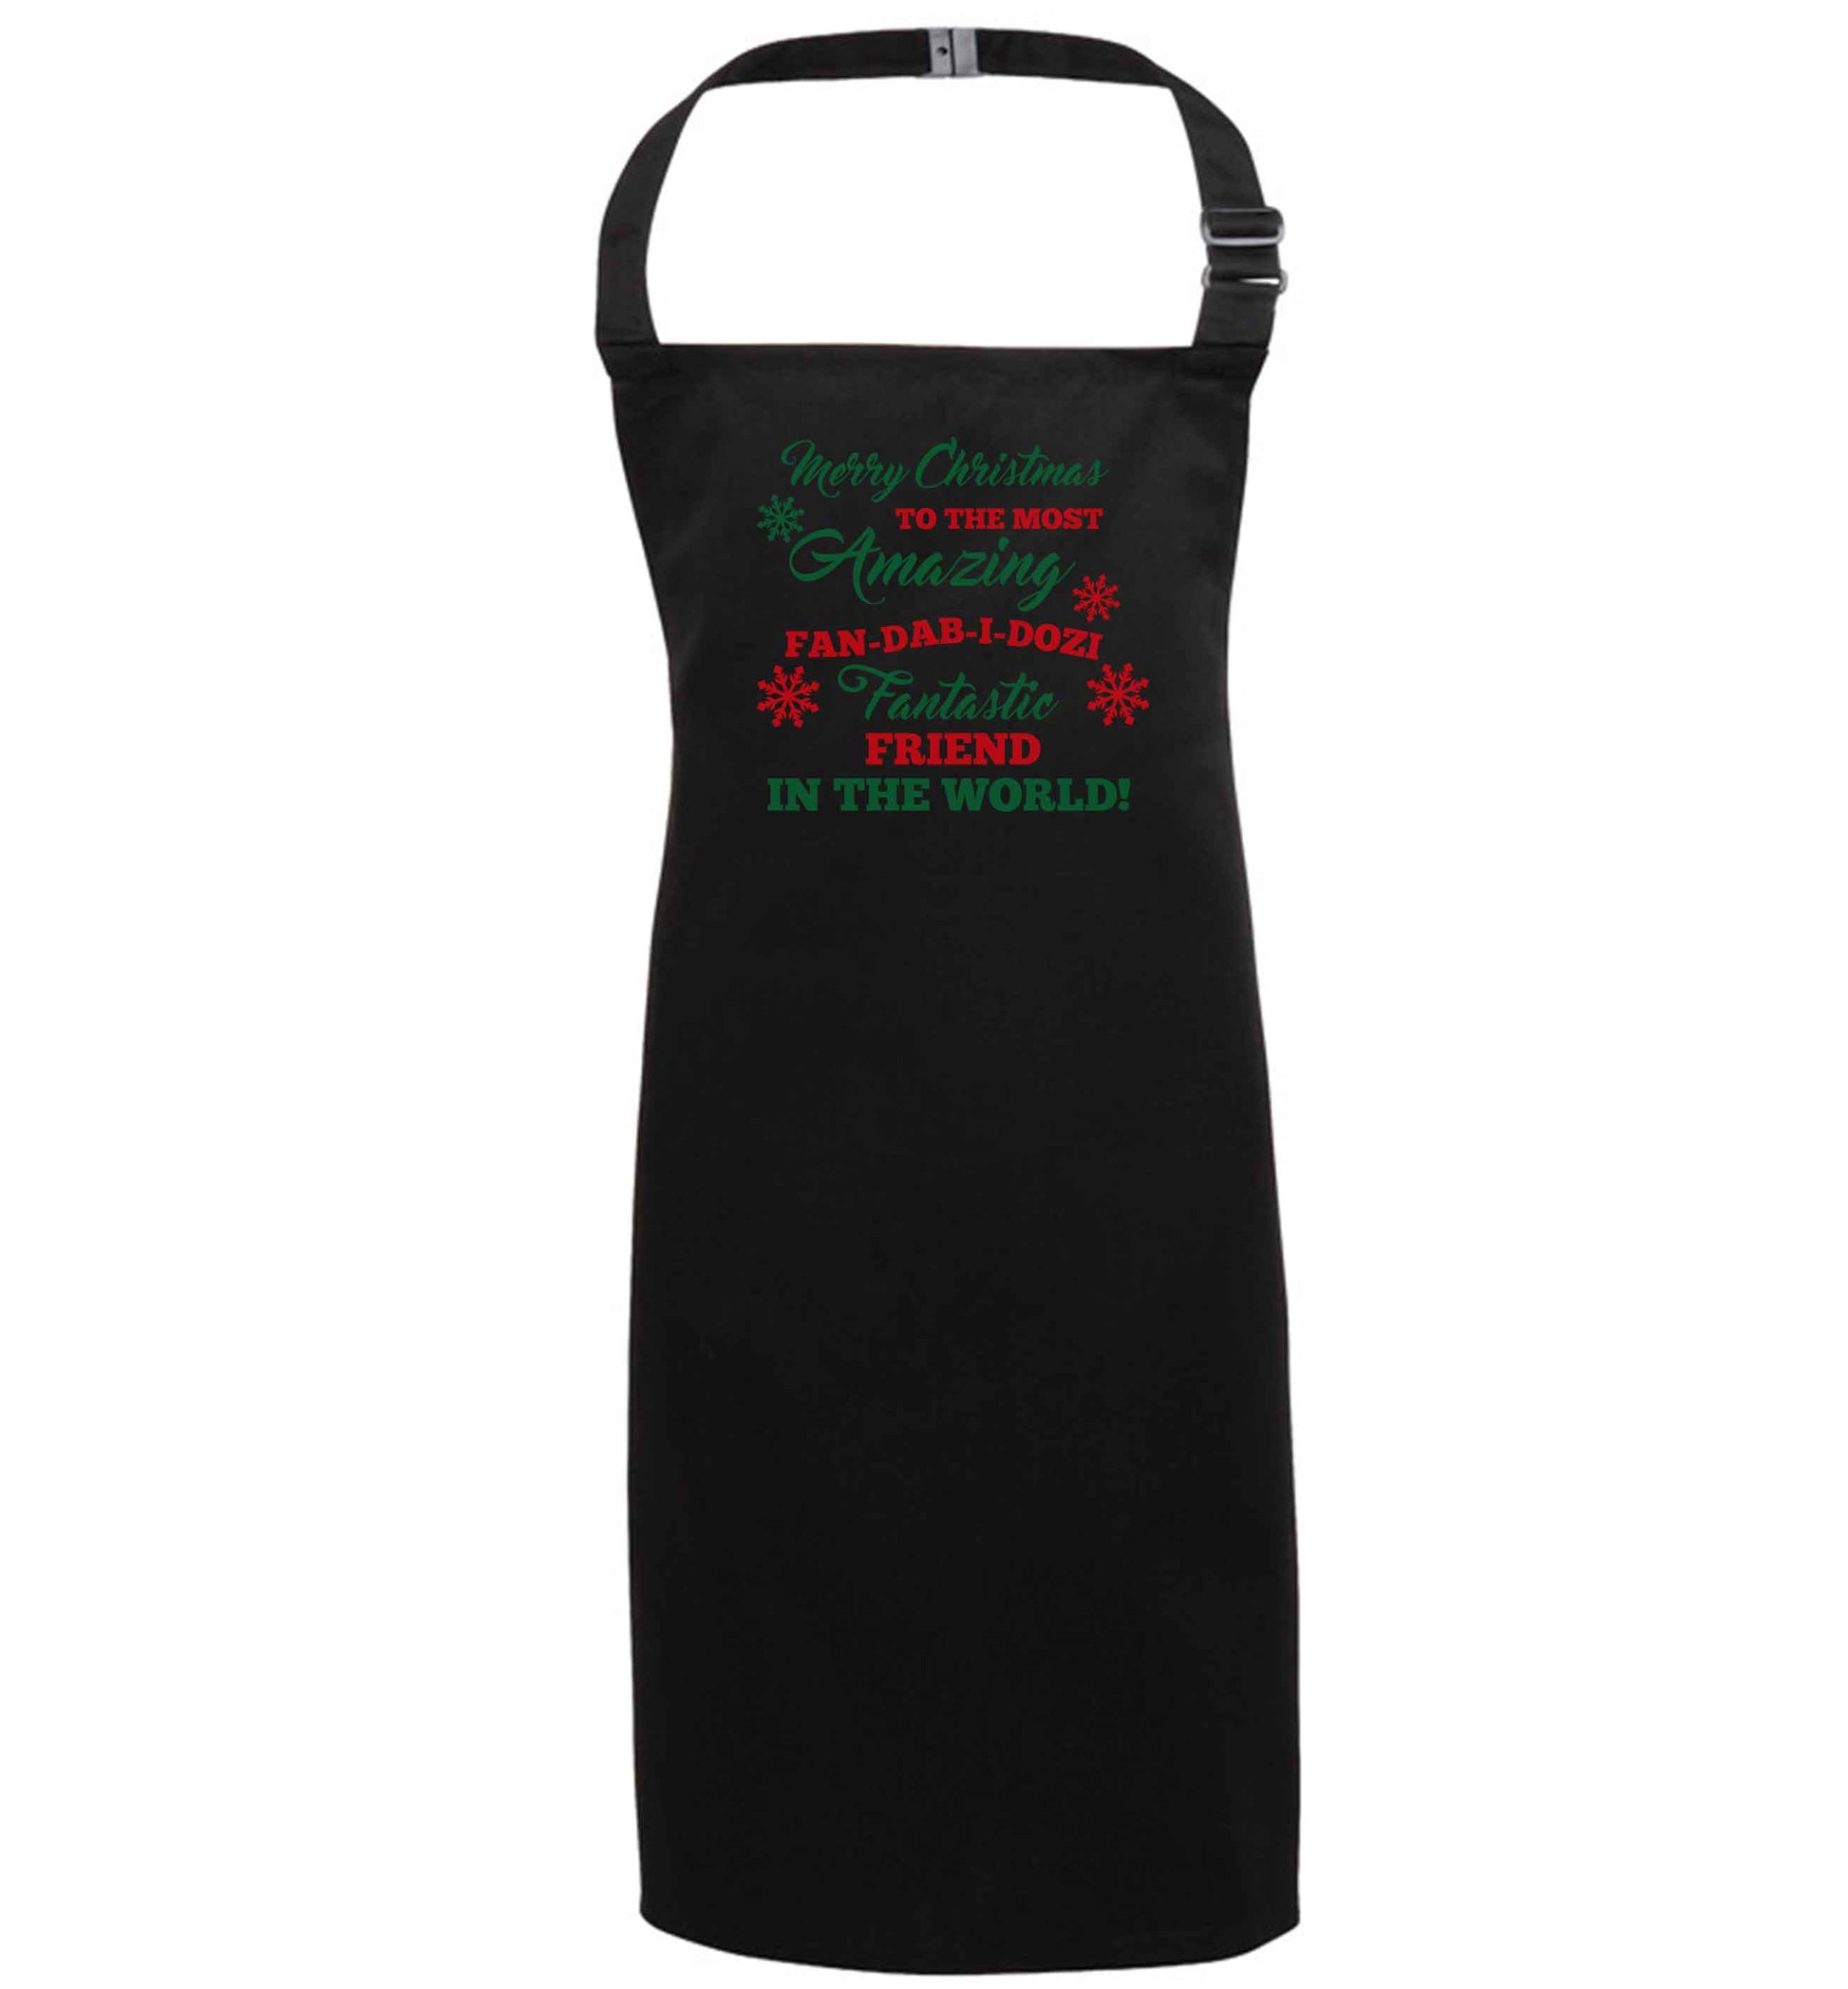 Merry Christmas to the most amazing fan-dab-i-dozi fantasic friend in the world black apron 7-10 years